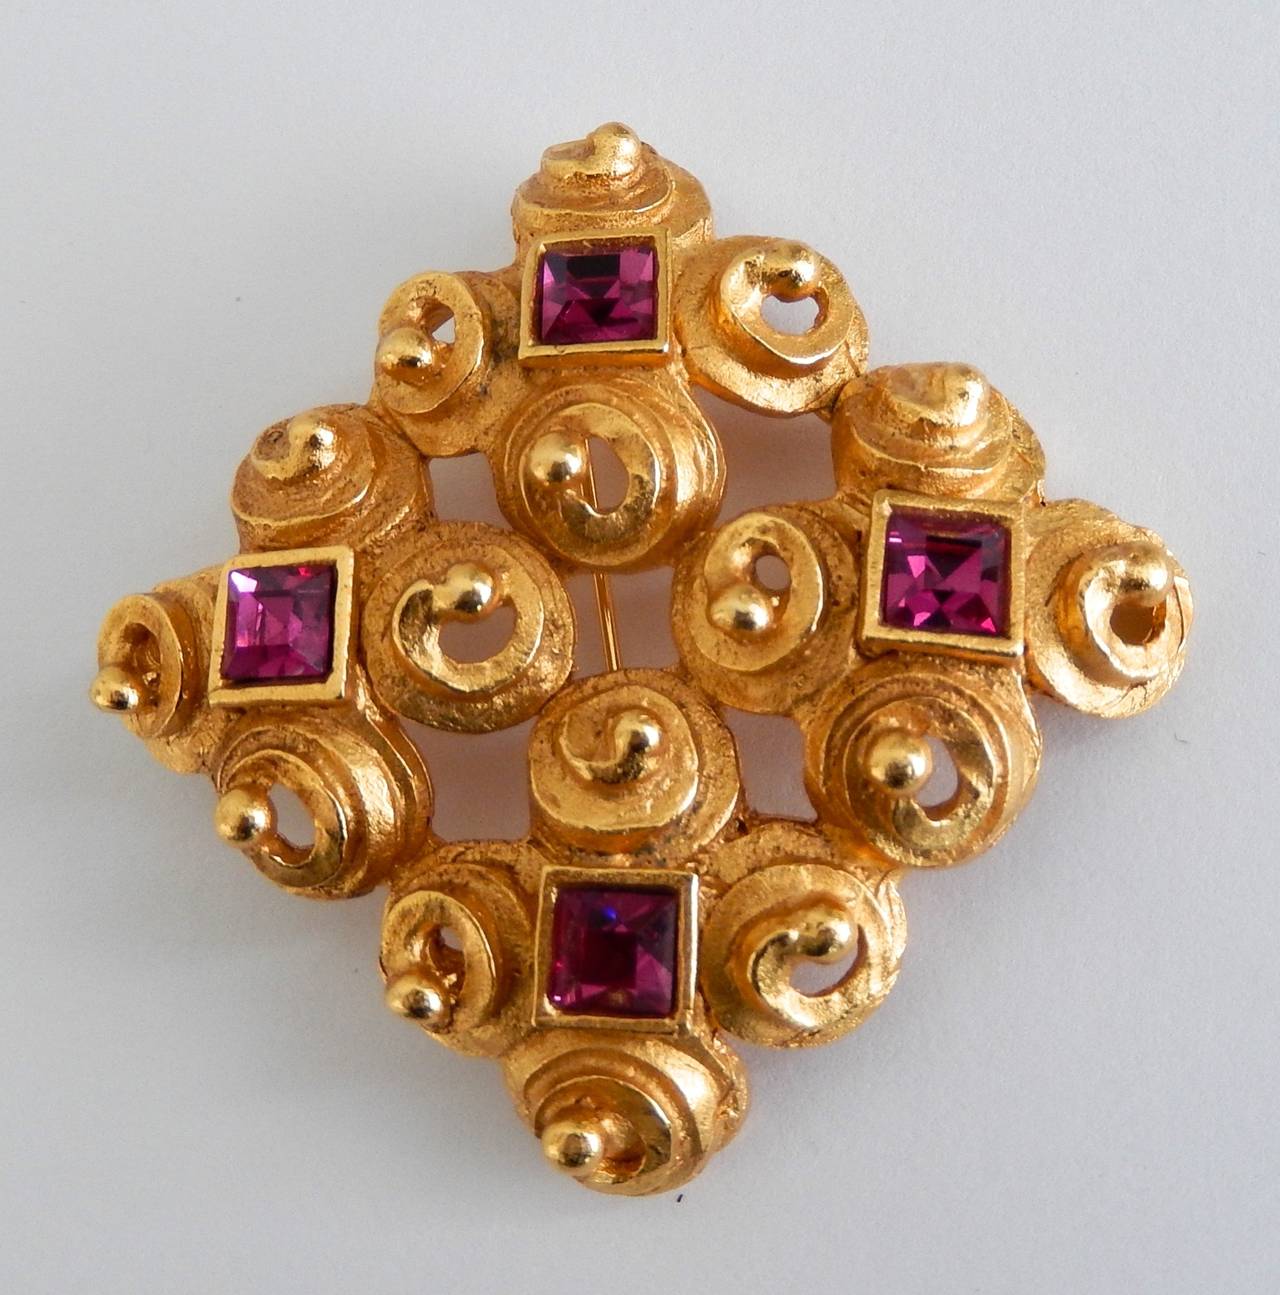 A gilt metal brooch with faceted synthetic rubies by Lanvin, Paris.
Graceful, interlocking spiral design with a rich, gilt metal patina. Beautifully made.  Marked:  LANVIN Paris